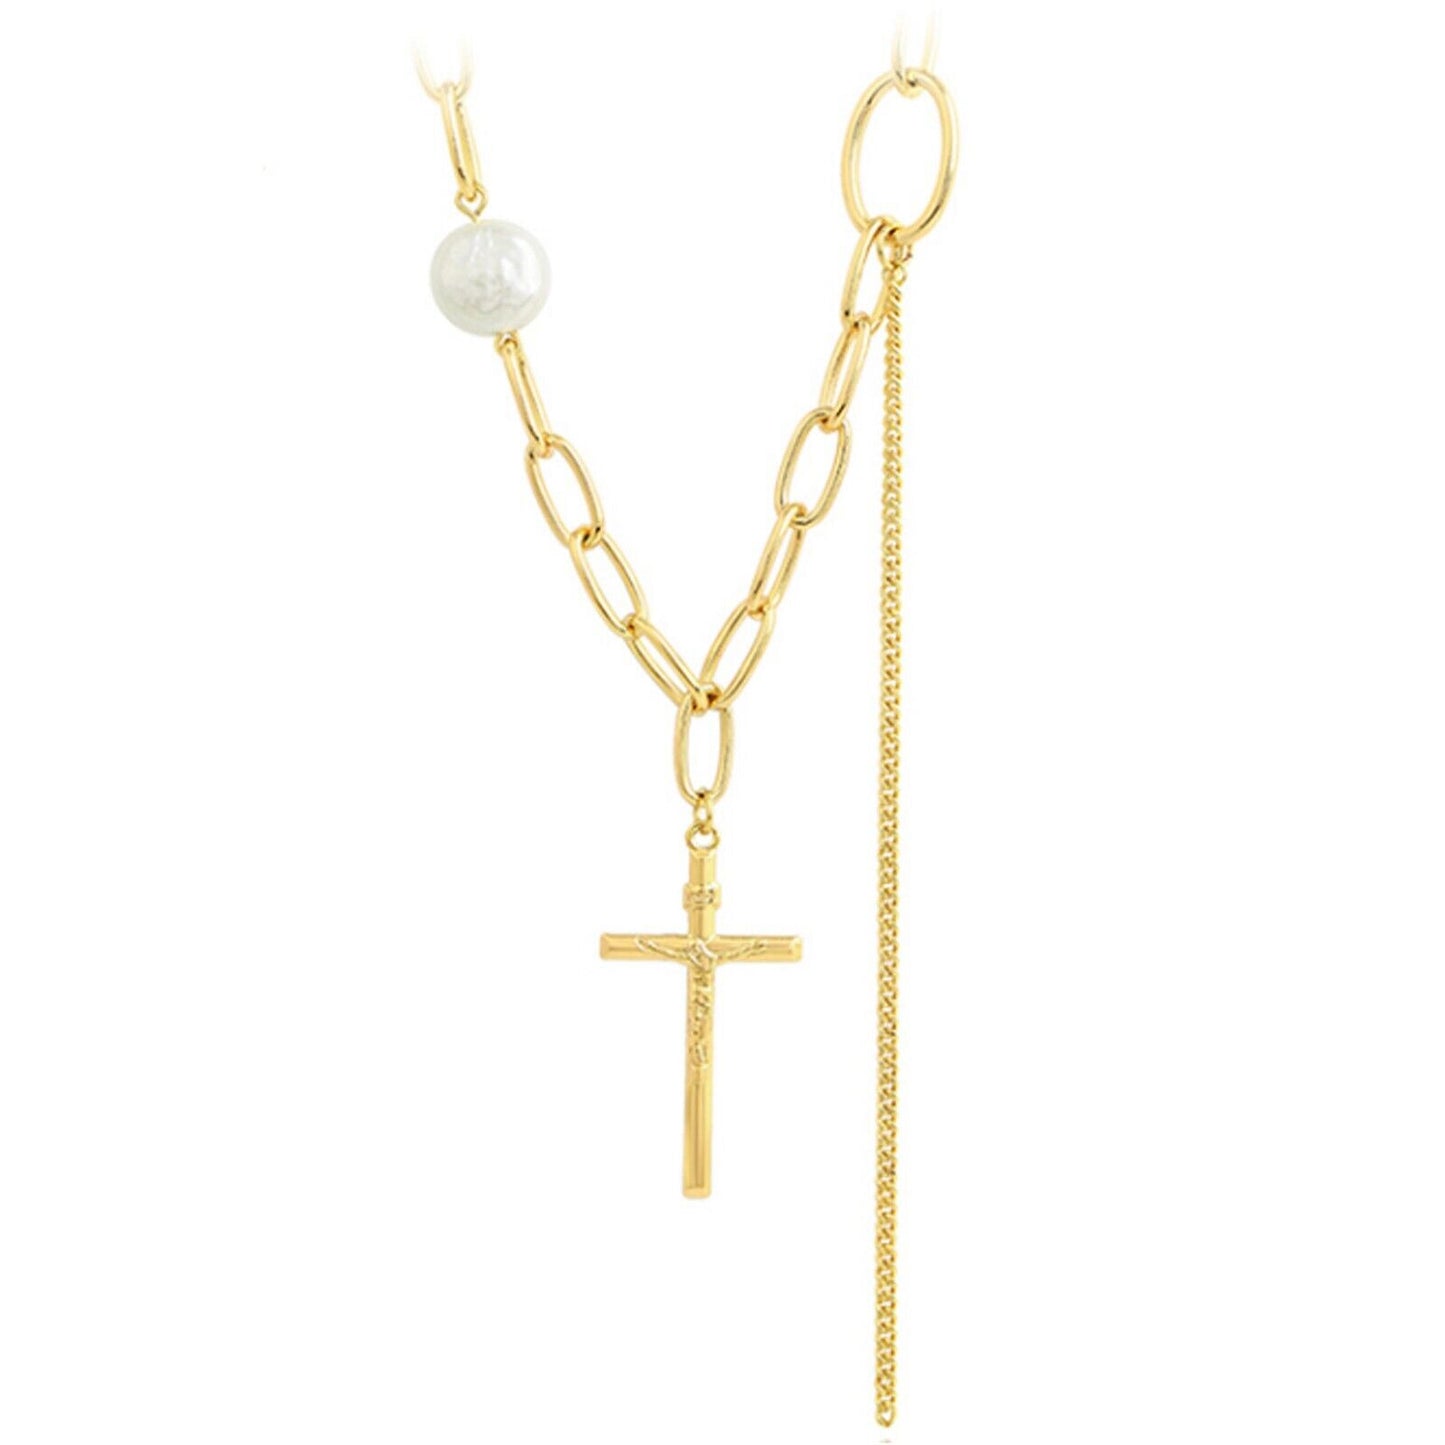 Necklaces - 14K Gold Plated. Cross Pendant & stylish Chain.